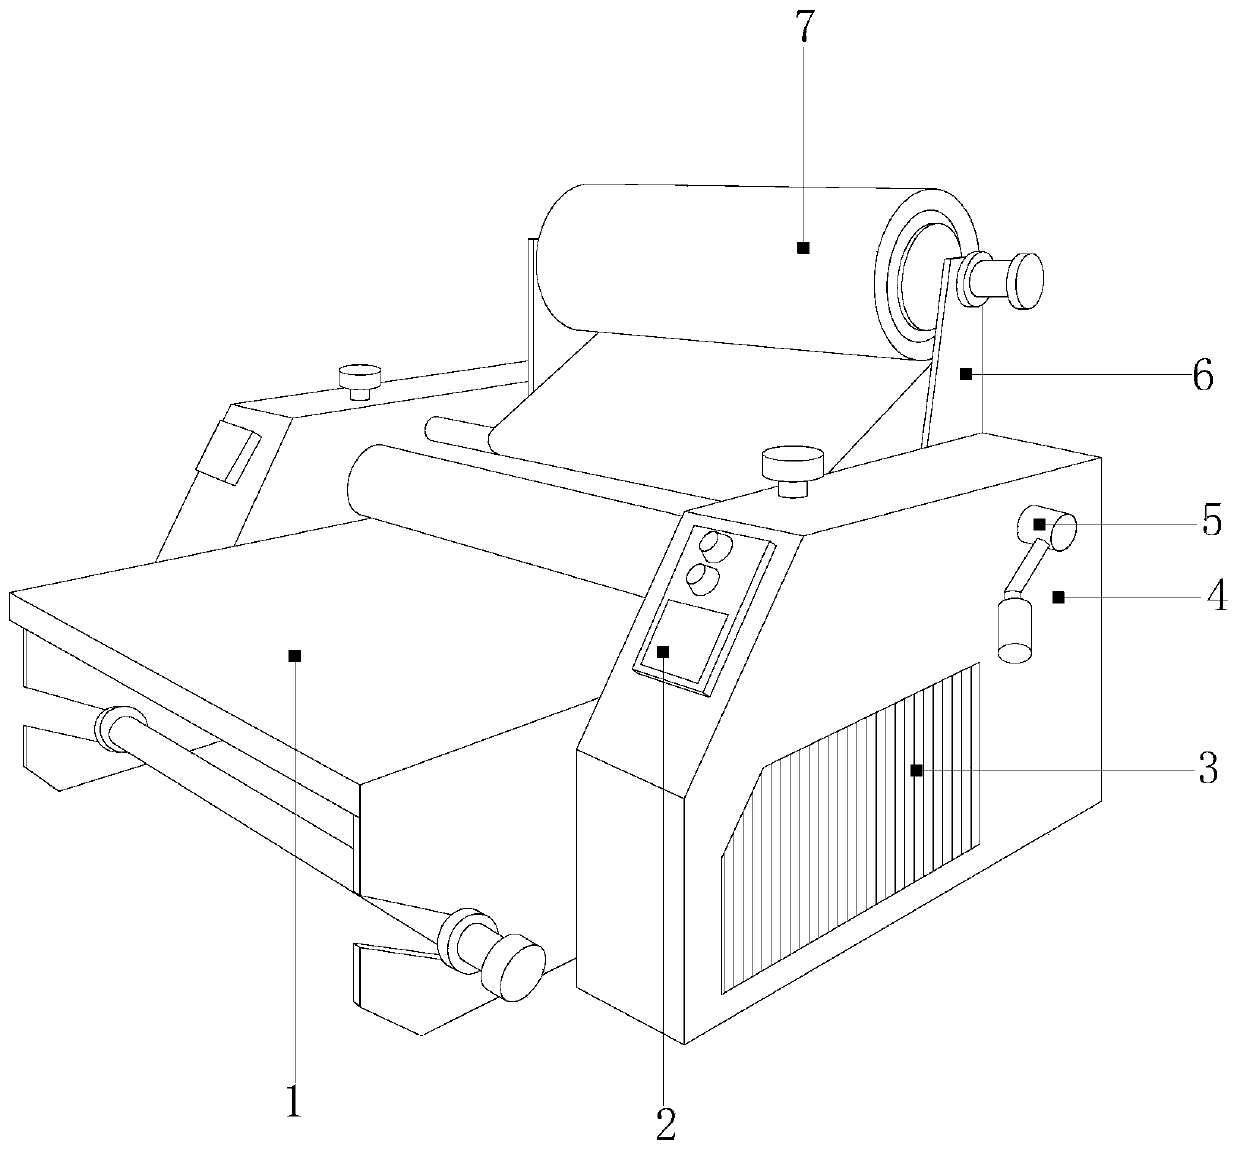 Film covering device for packaging box printing process